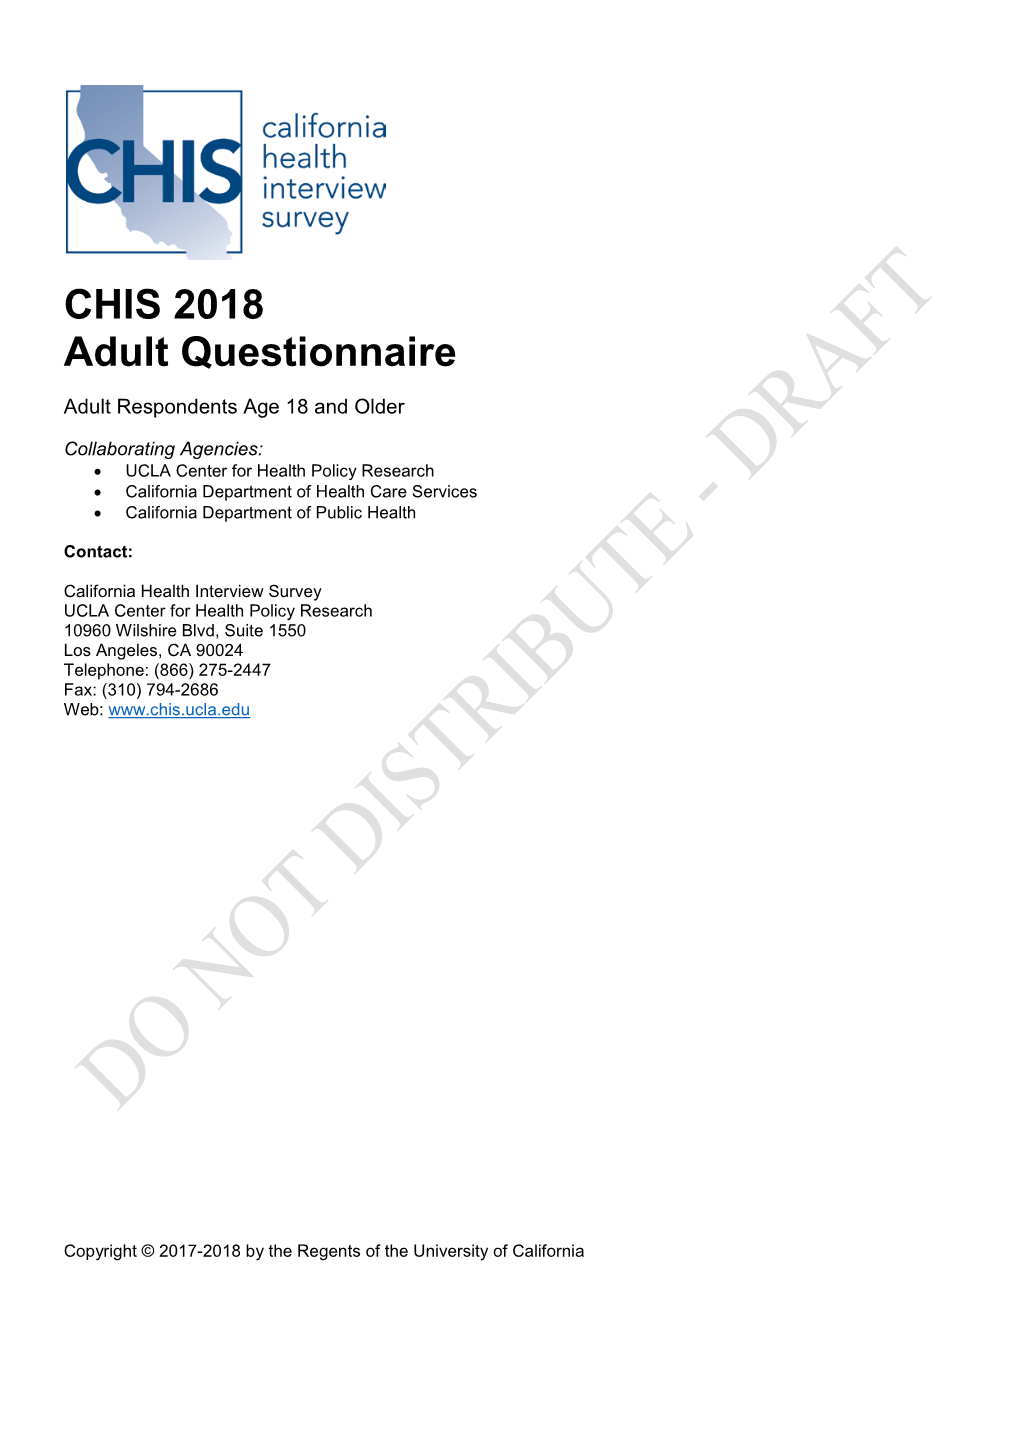 CHIS 2018 Adult Questionnaire